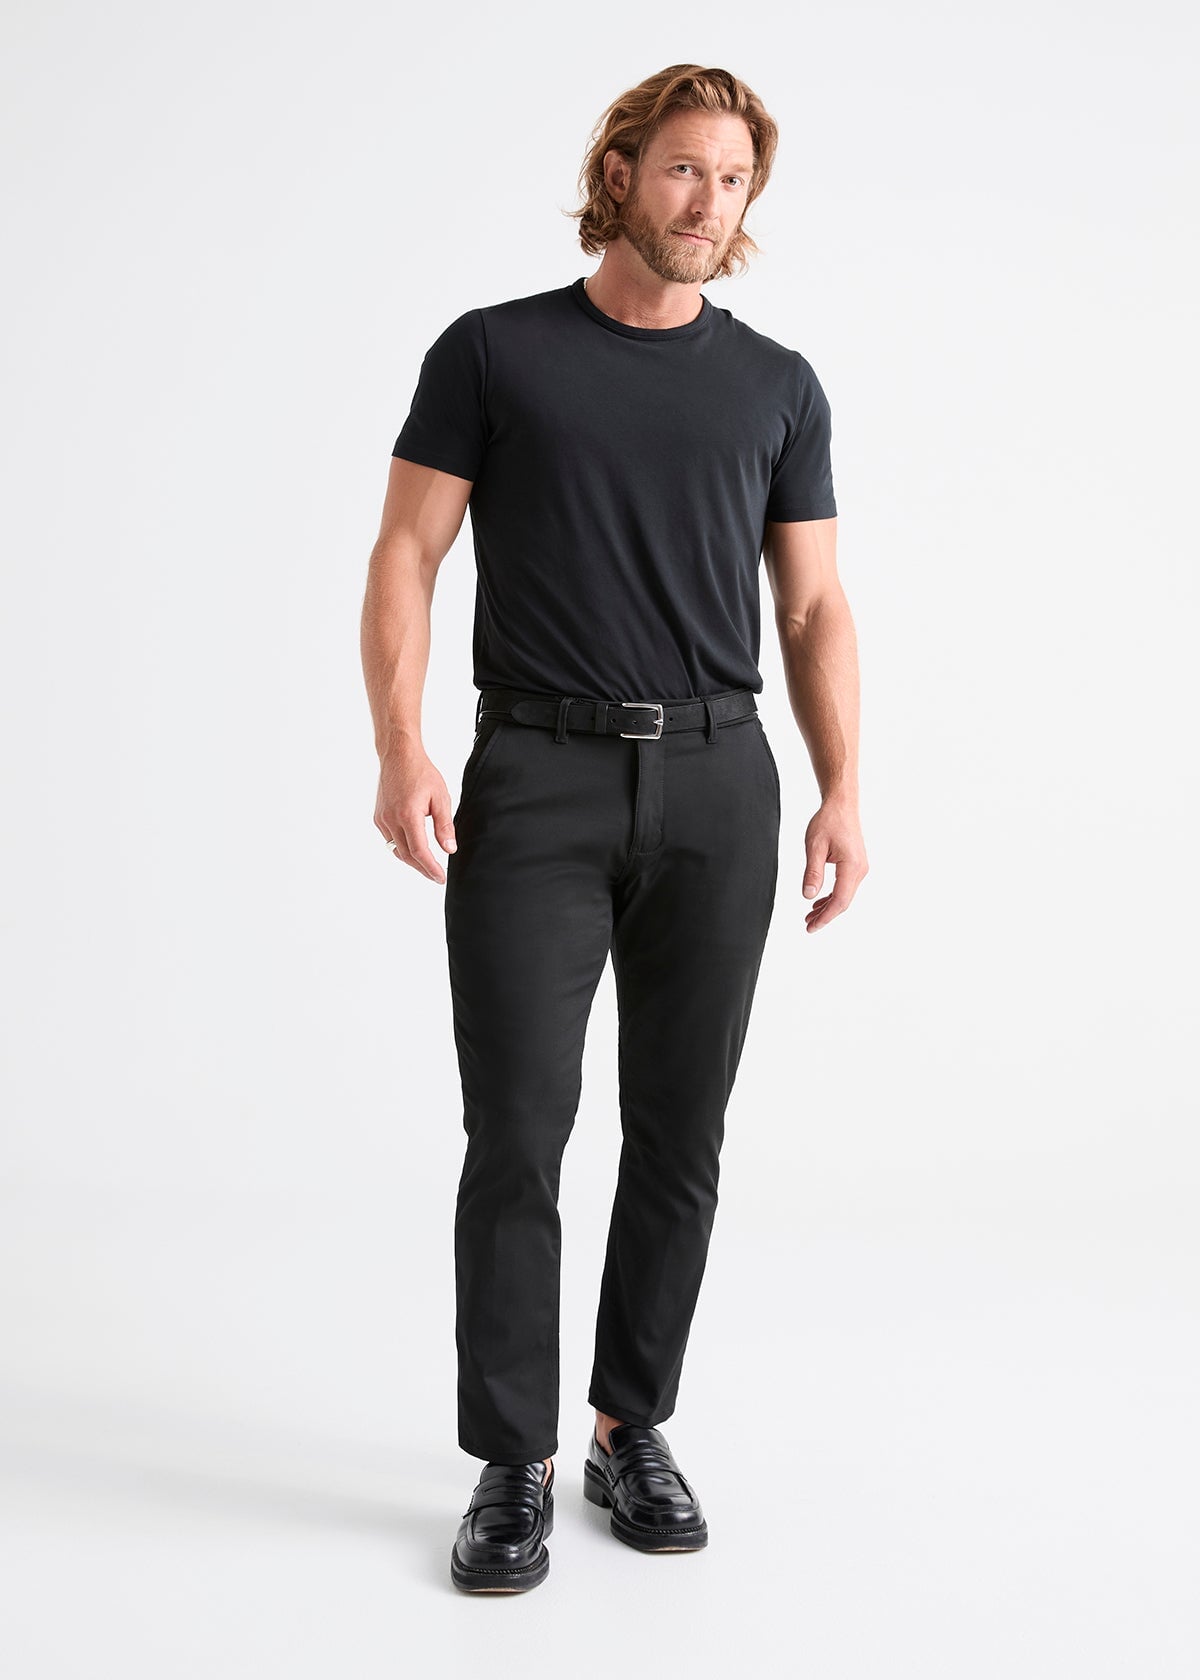 Men's Relaxed Fit Stretch Dress Pant